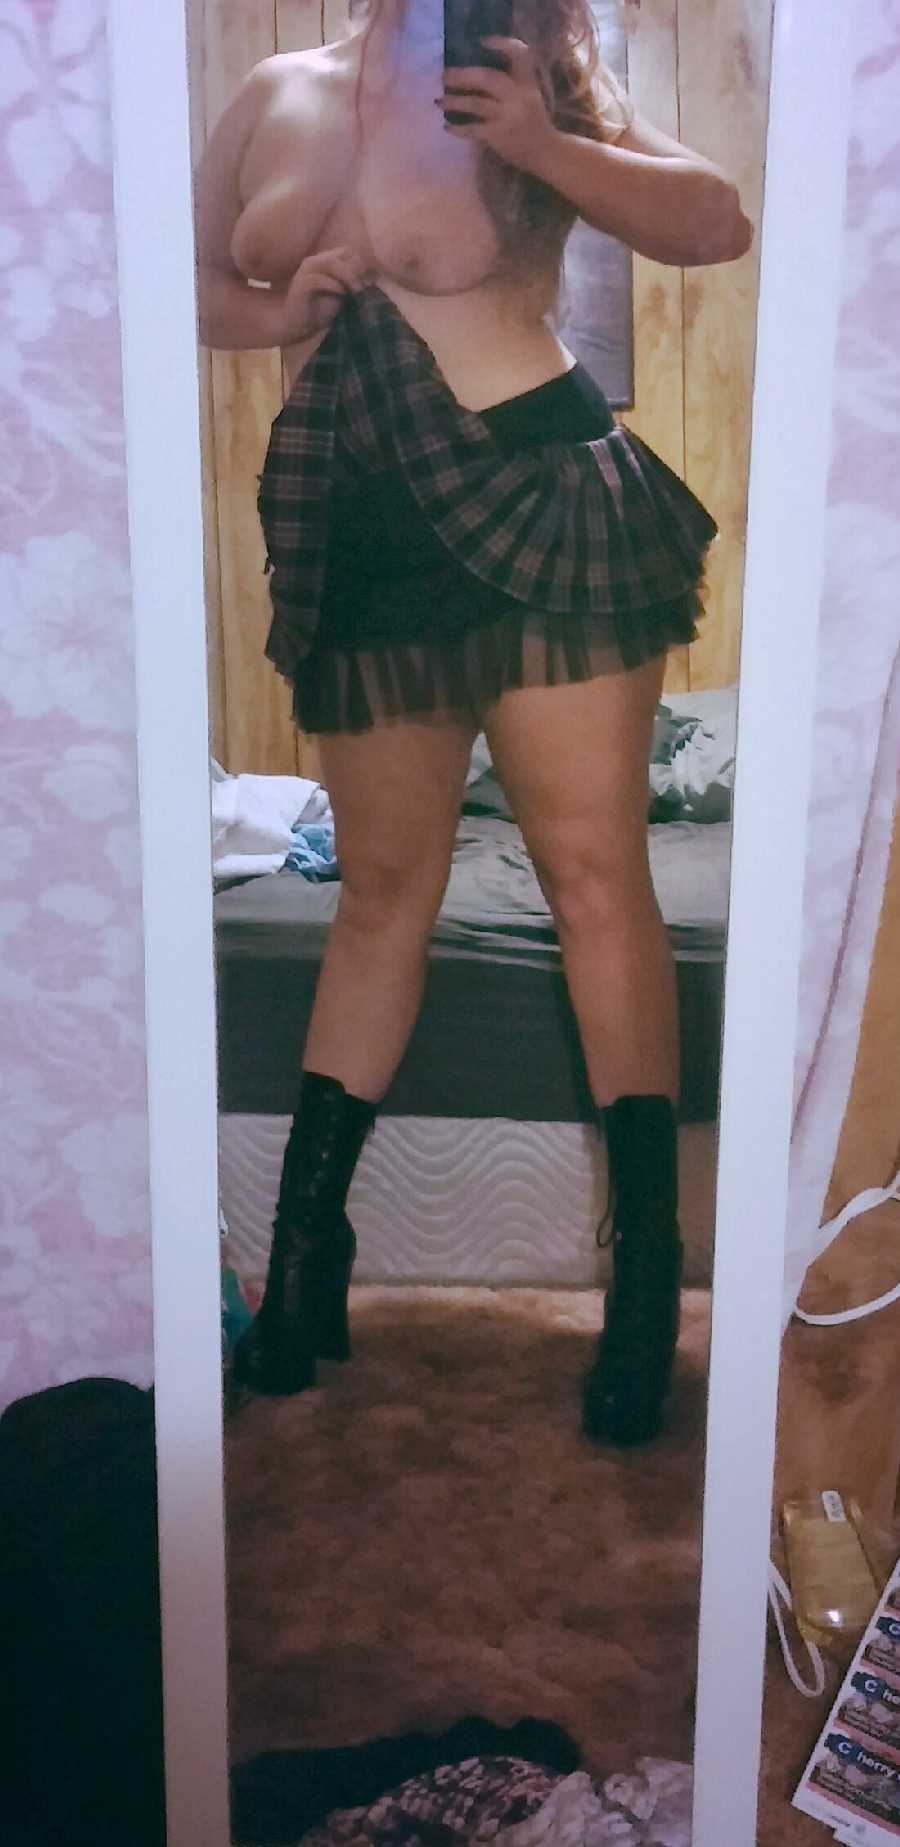 Just the Skirt and Boots